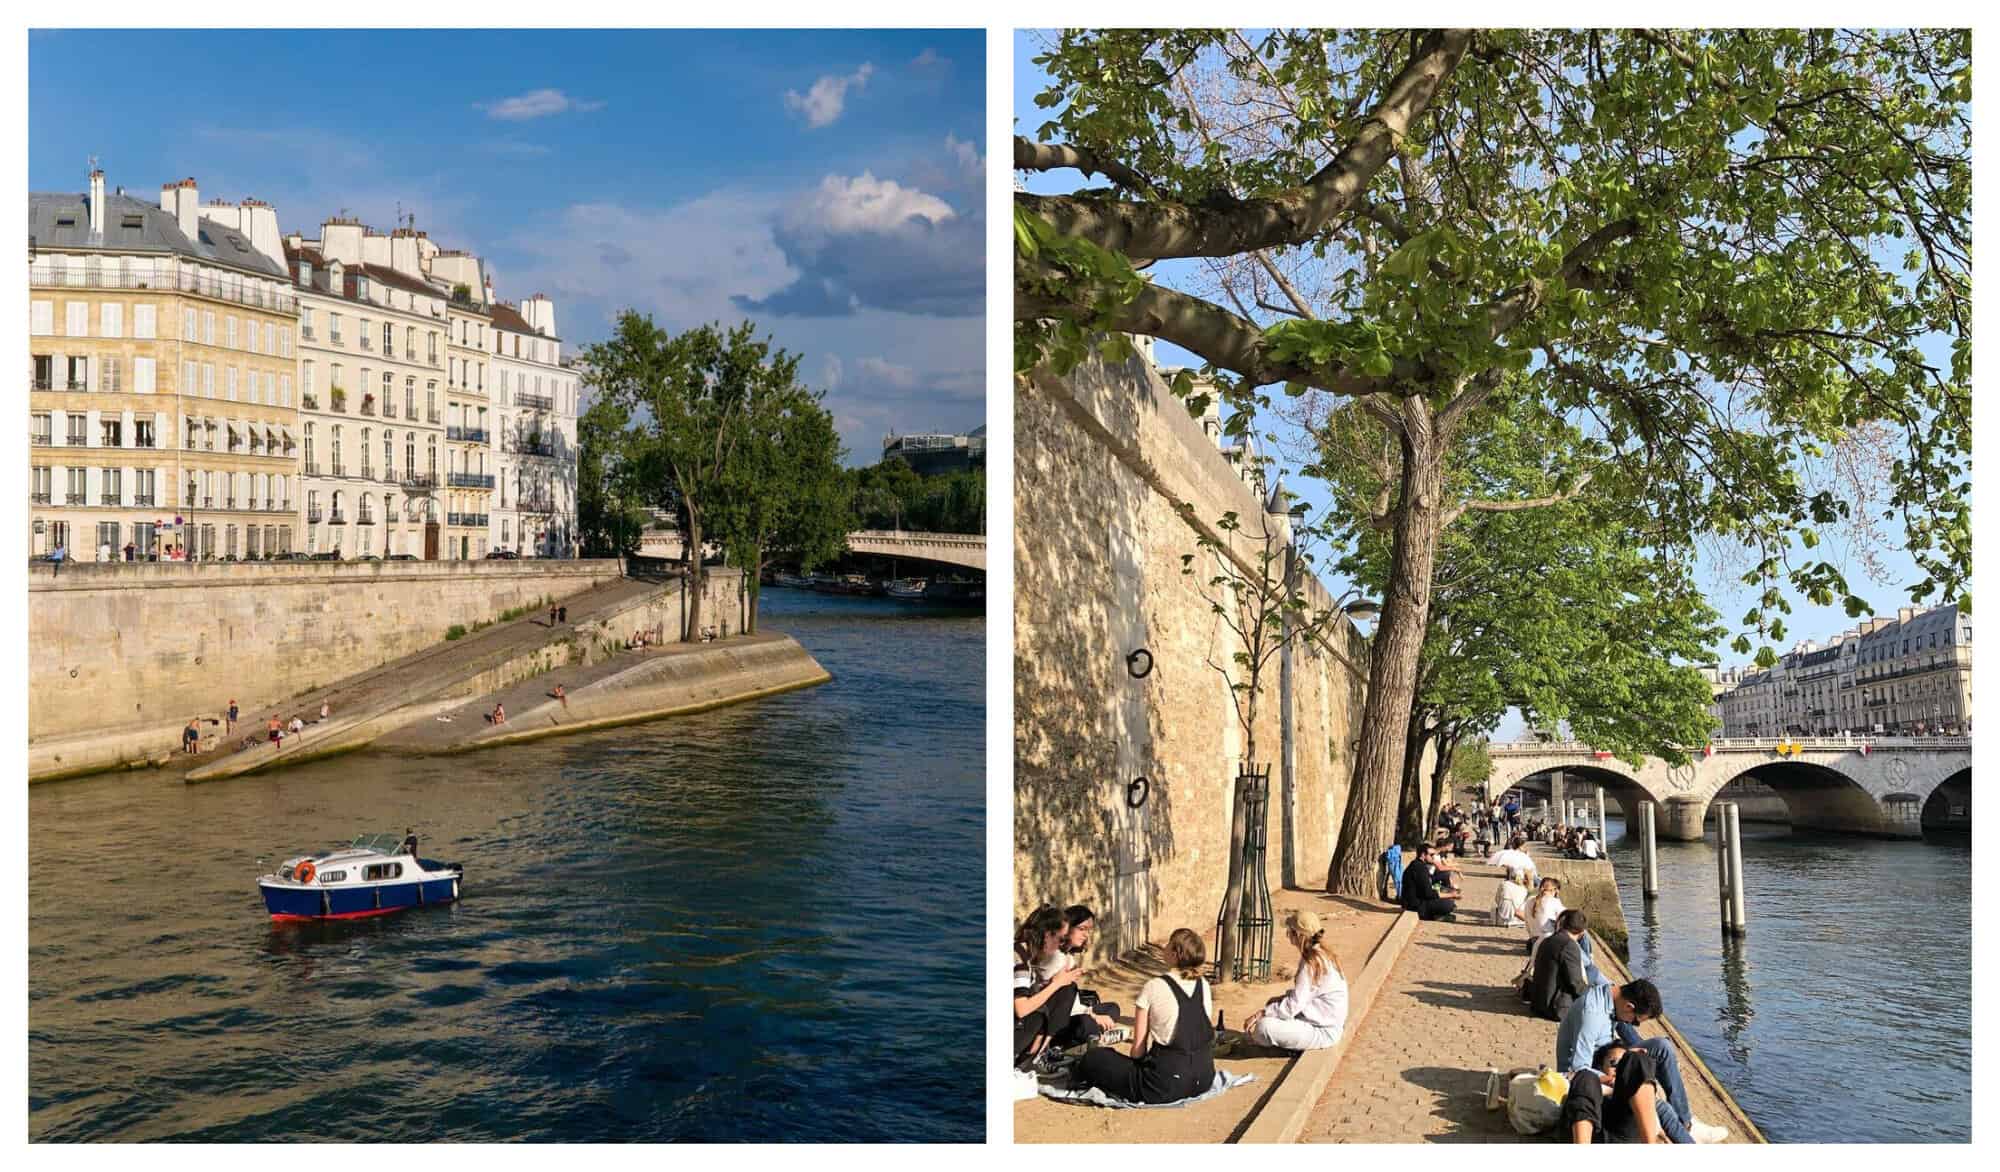 Left: A slope that runs down into the Seine is lit up by the sun. Right: Groups are sunbathing by the side of the Seine.